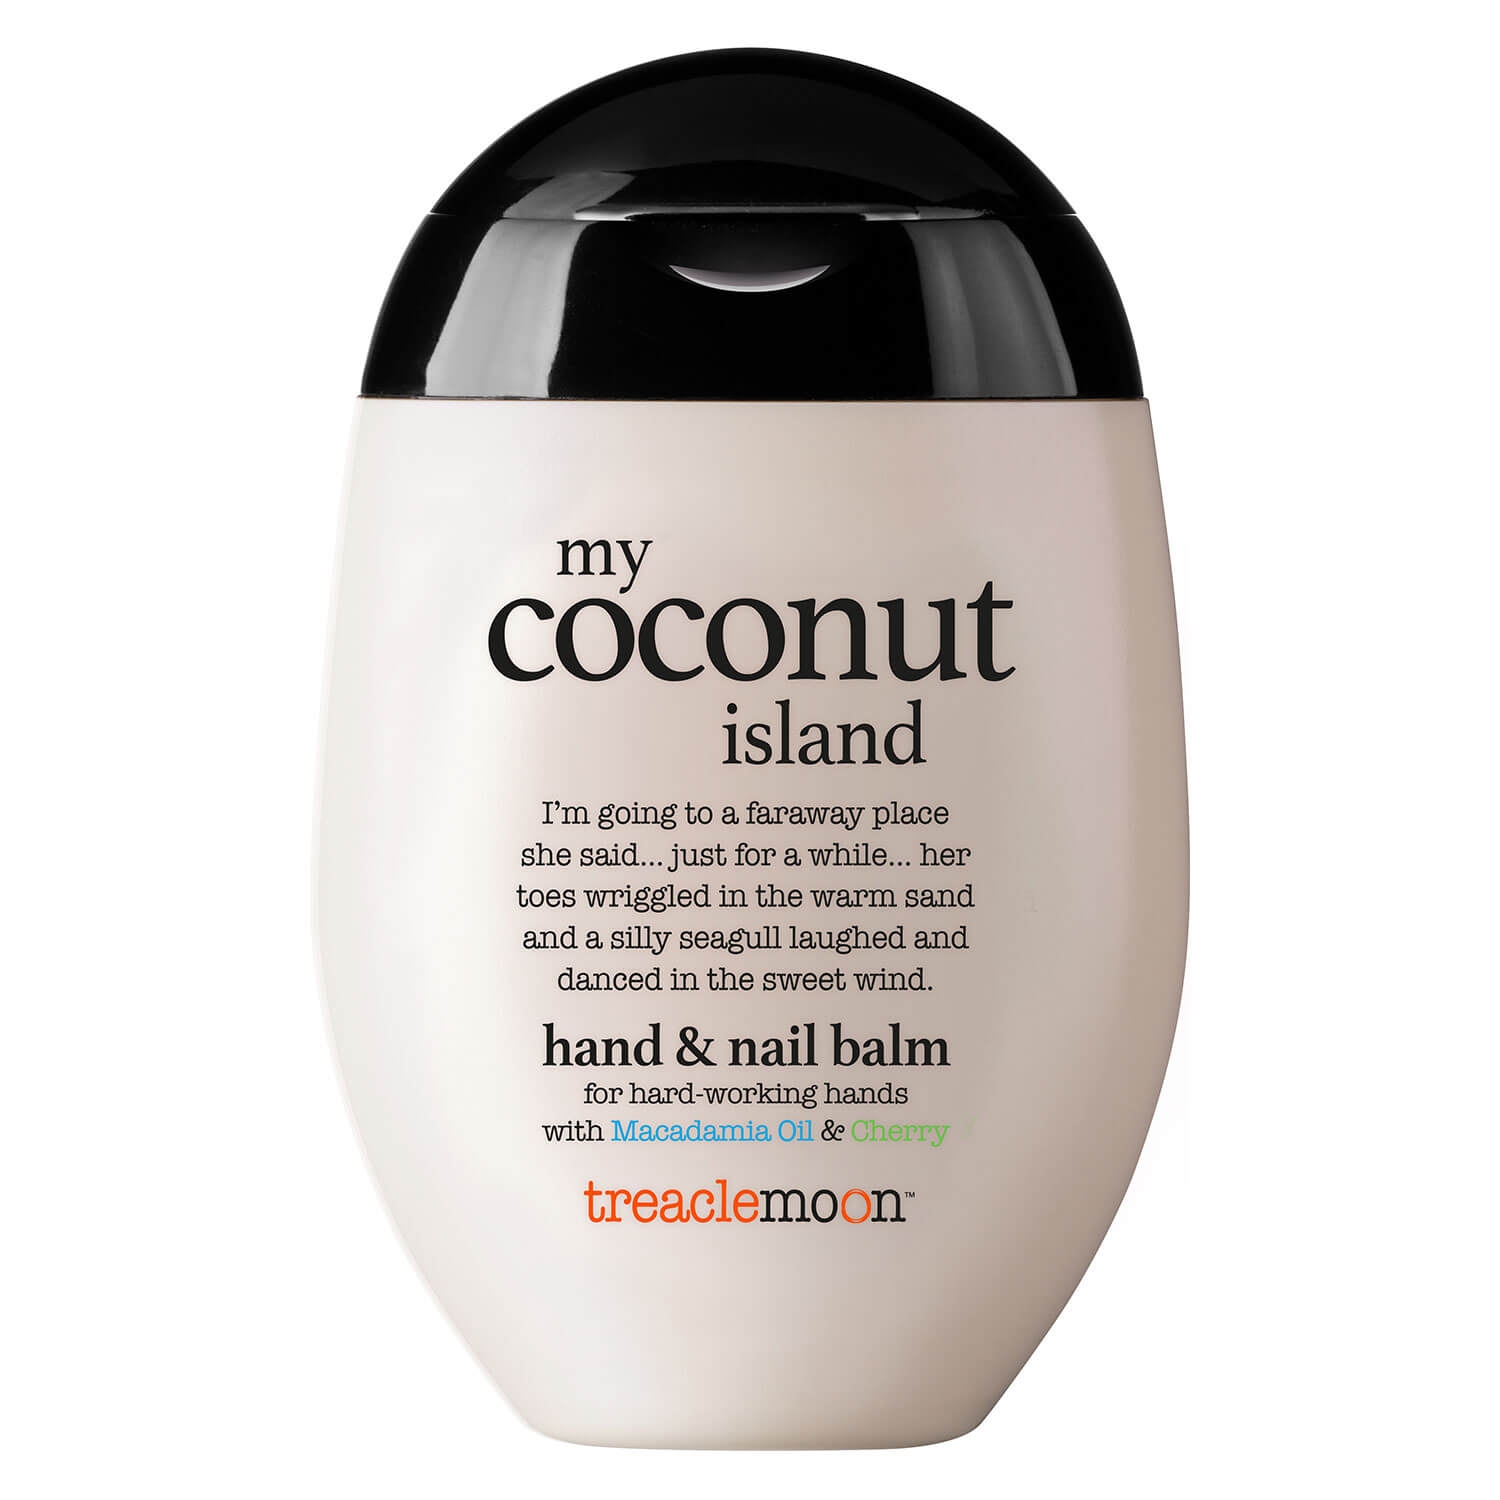 Product image from treaclemoon - my coconut island hand and nail balm